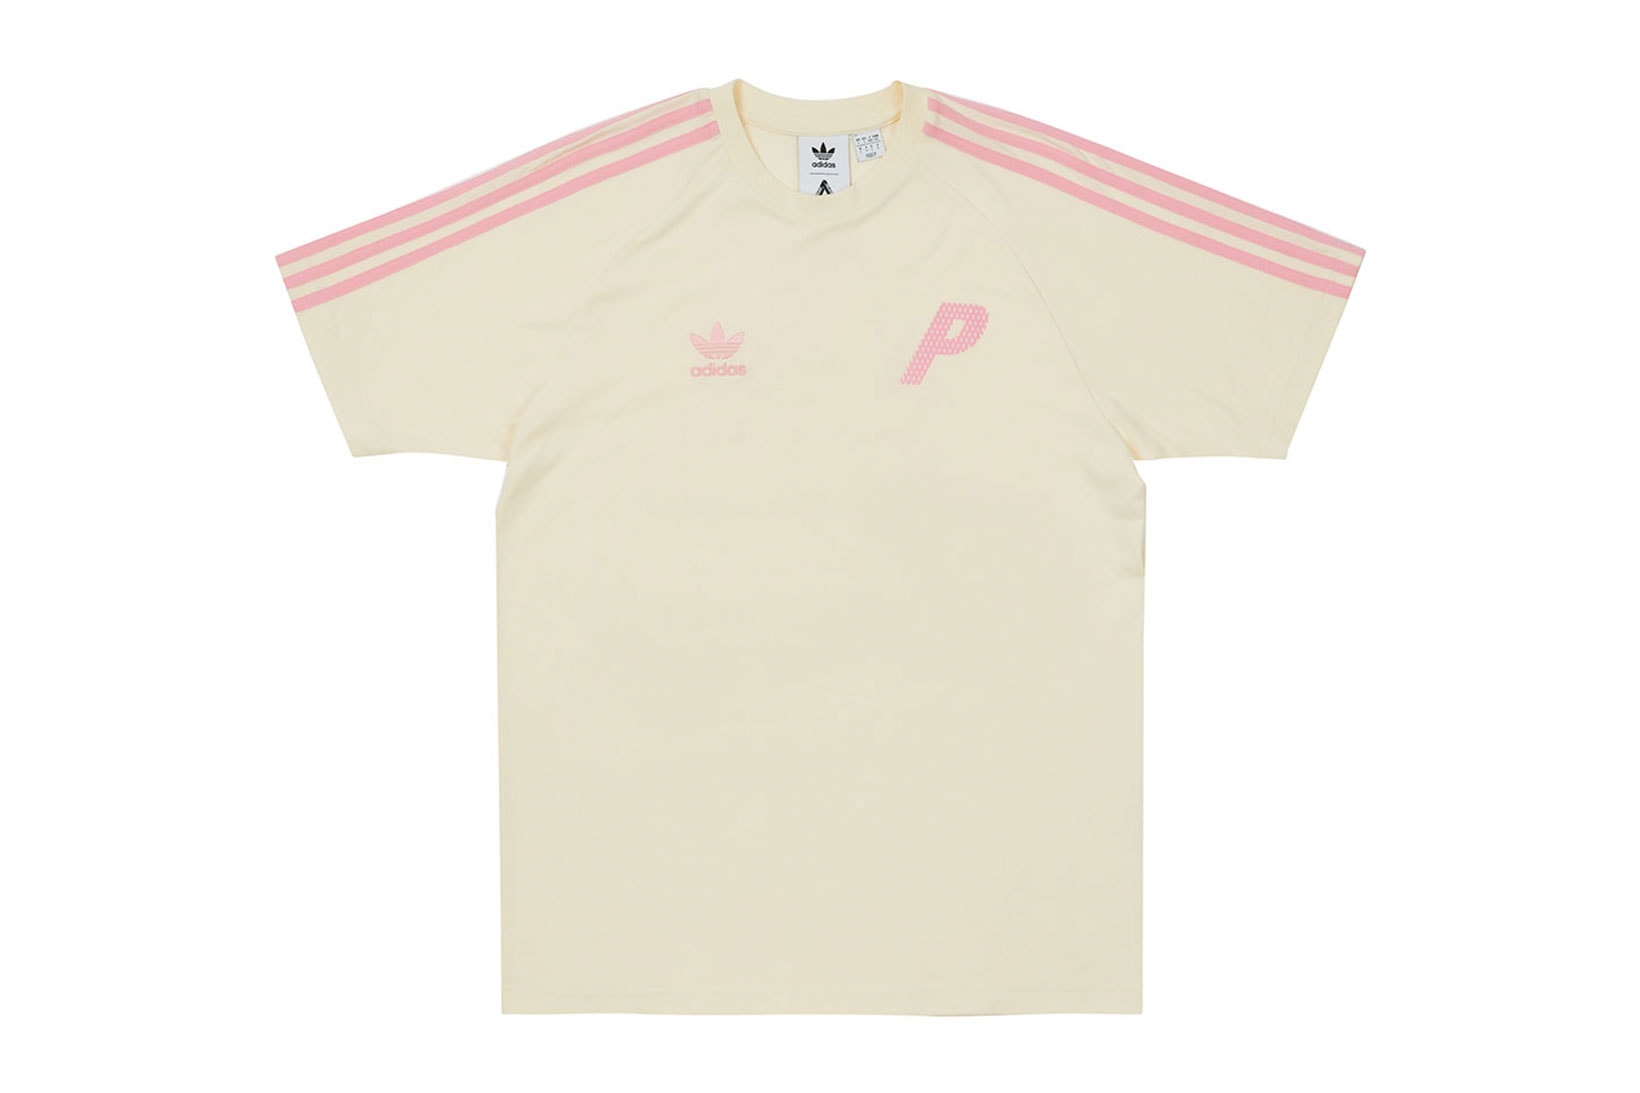 palace spring drop 4 collection adidas mini collaboration three stripes pink pastel